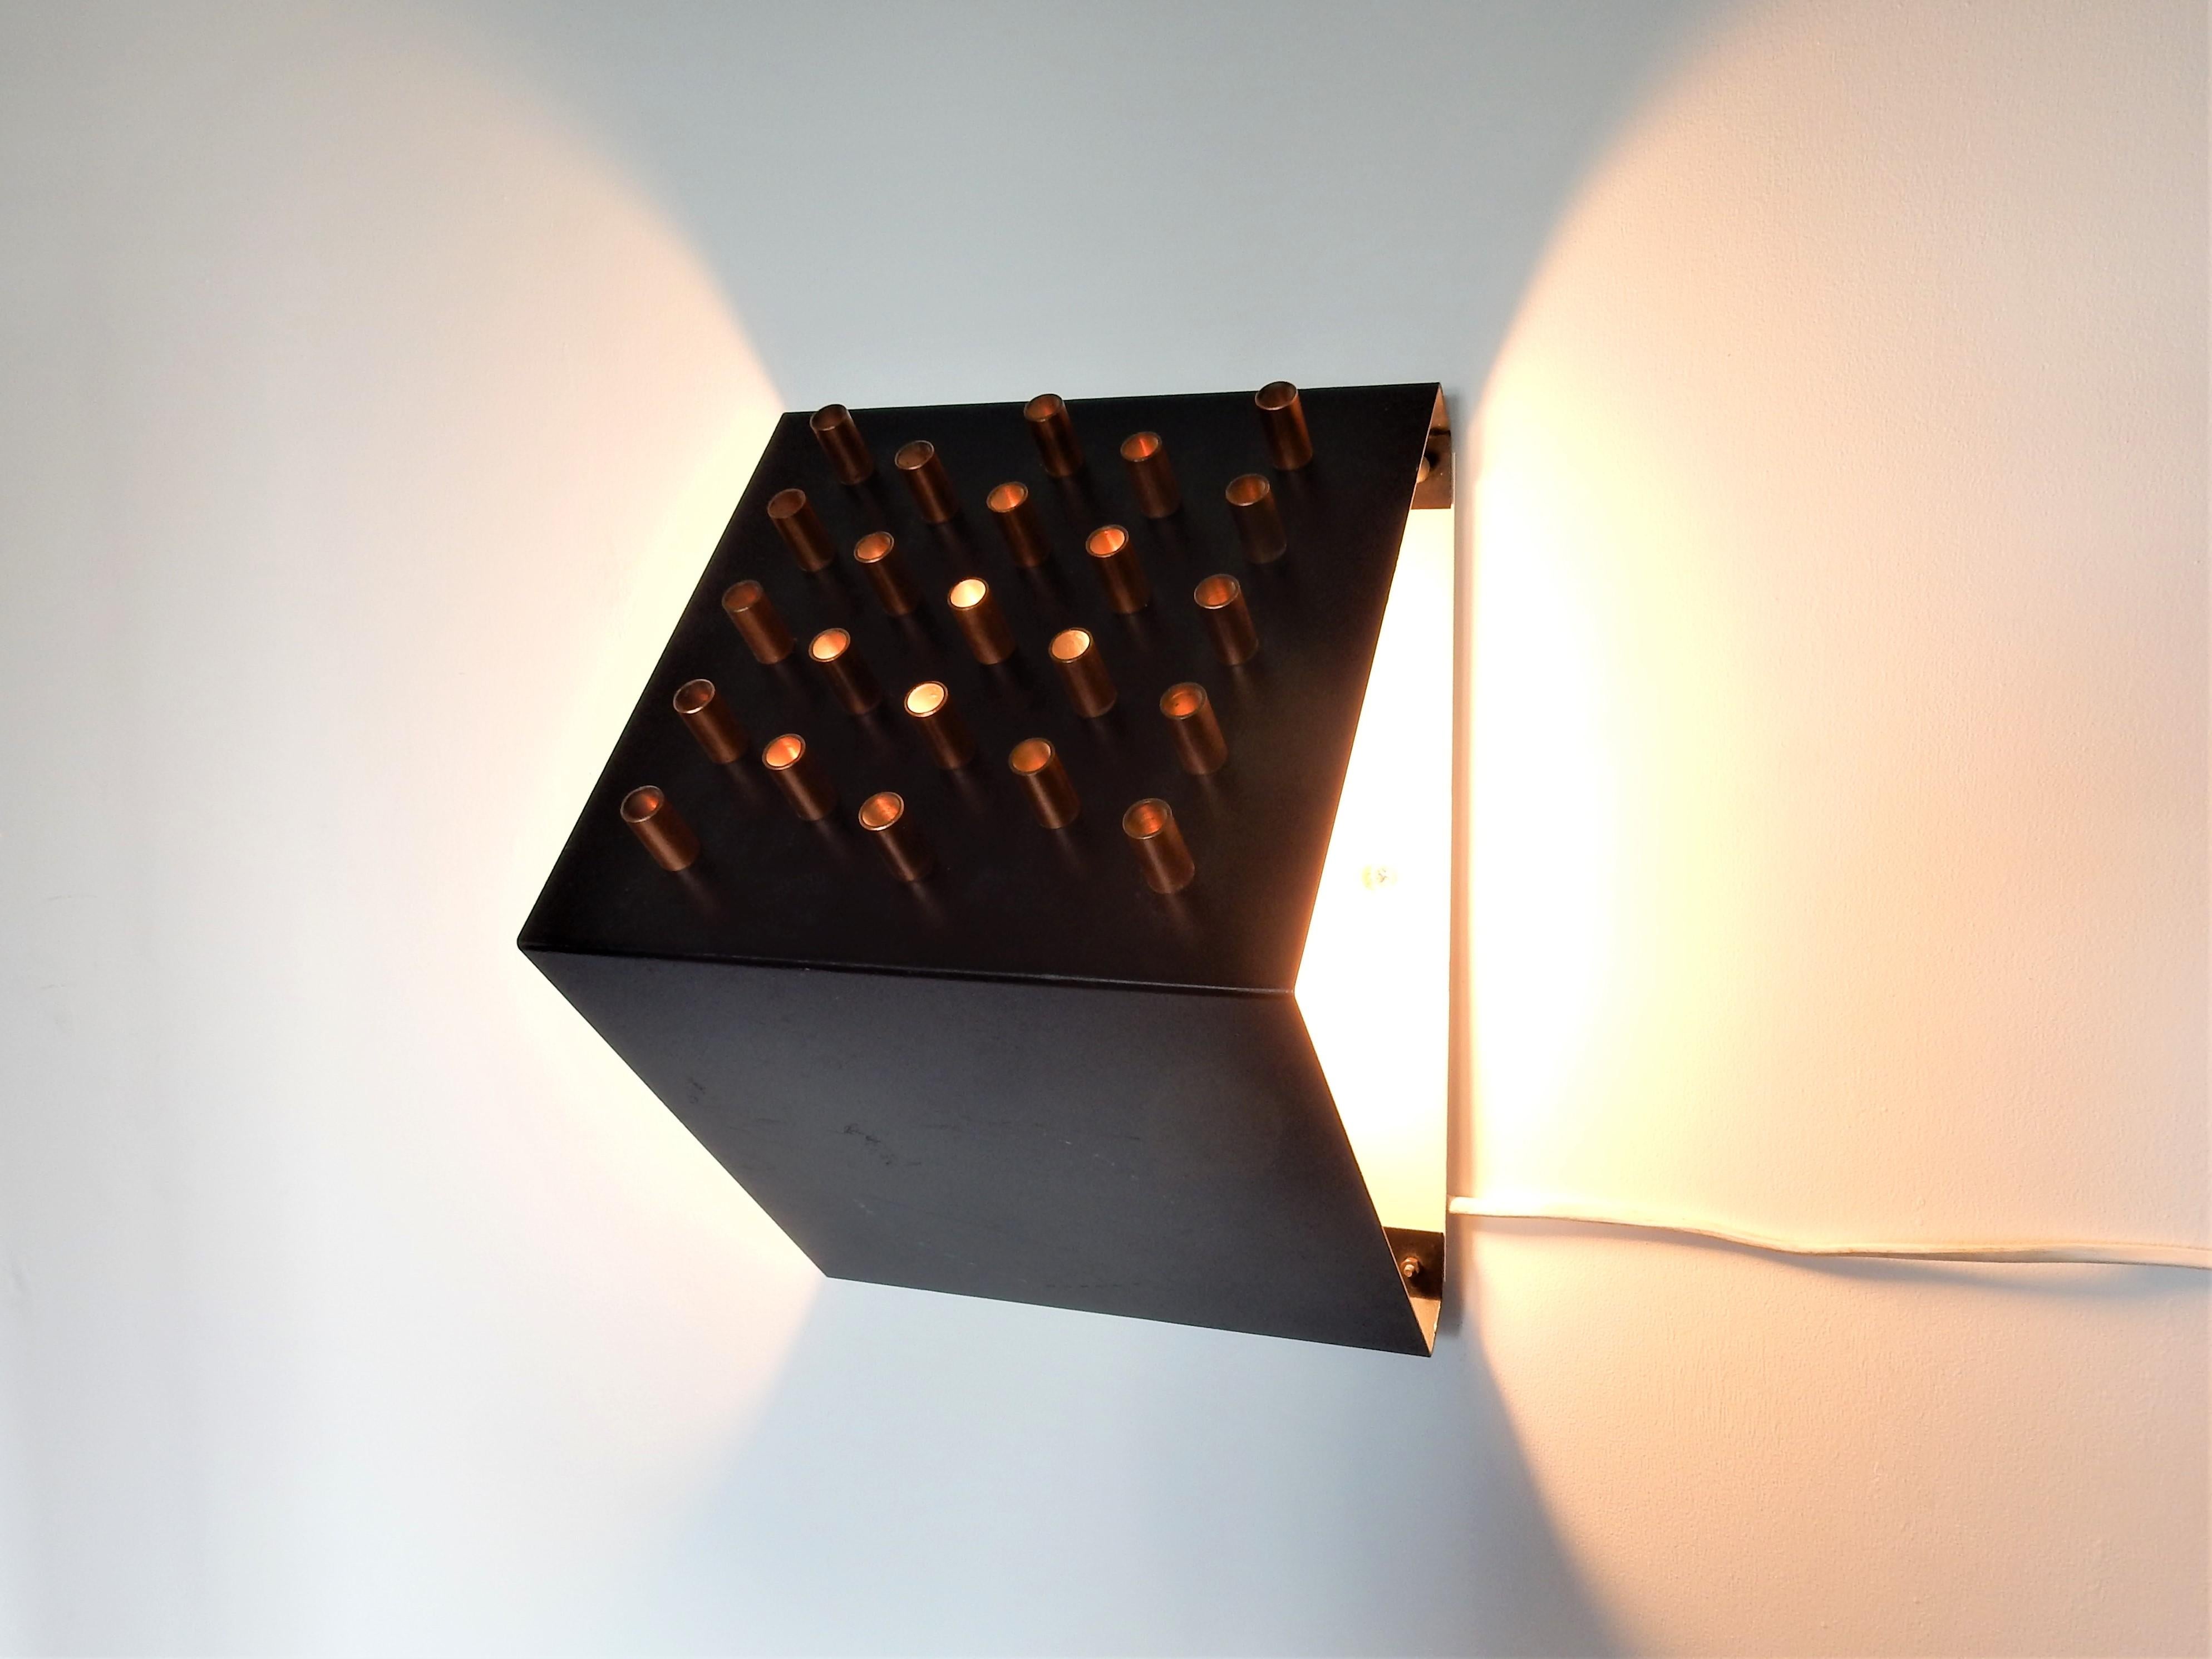 Copper 'Clair Obscur' Wall Lamp by RAAK Amsterdam, Netherlands, 1960s For Sale